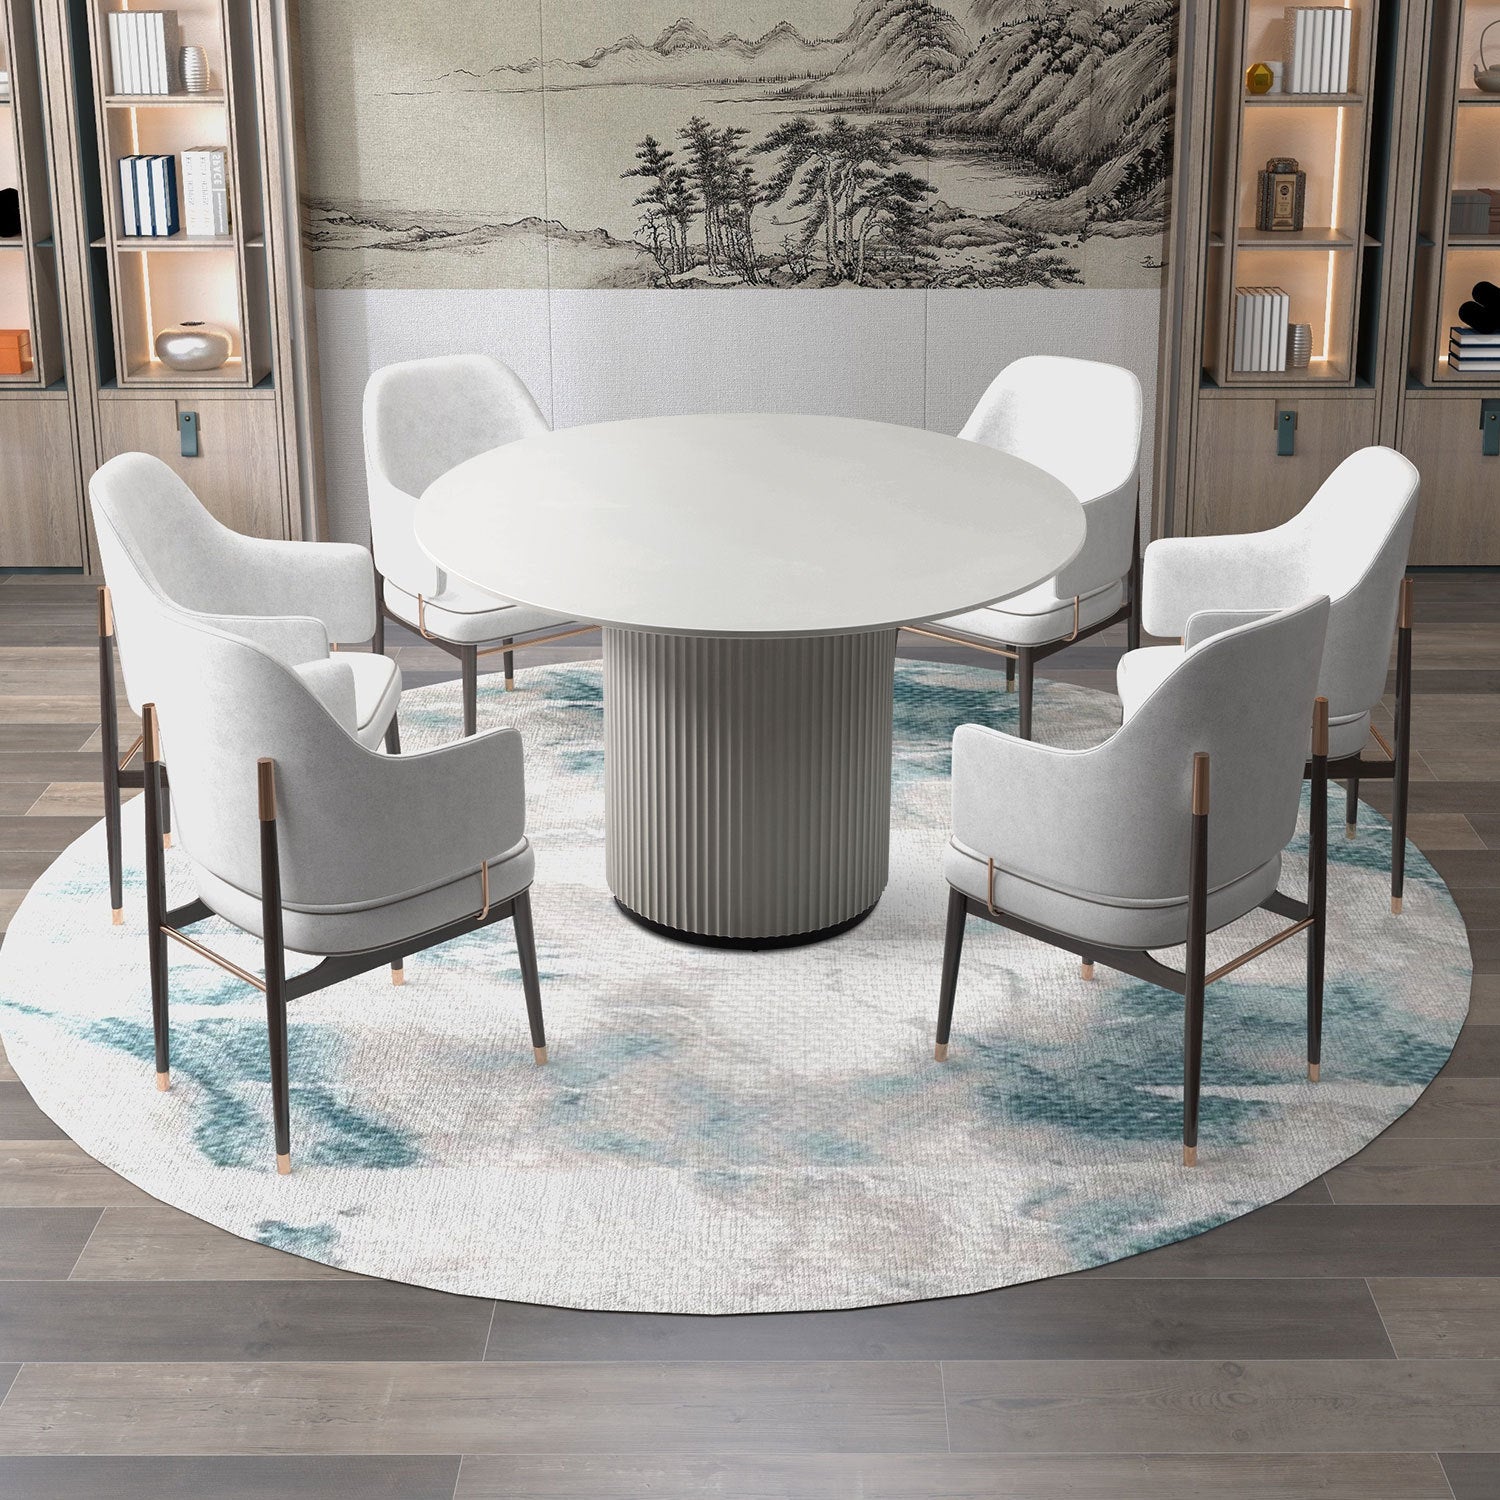 Round Dining Table, MDF handcraft Pedestal Dining Room Table Restaurant Furniture Leisure Coffee Table-47.2" L x 47.2" W x 29.5" H - Enova Luxe Home Store